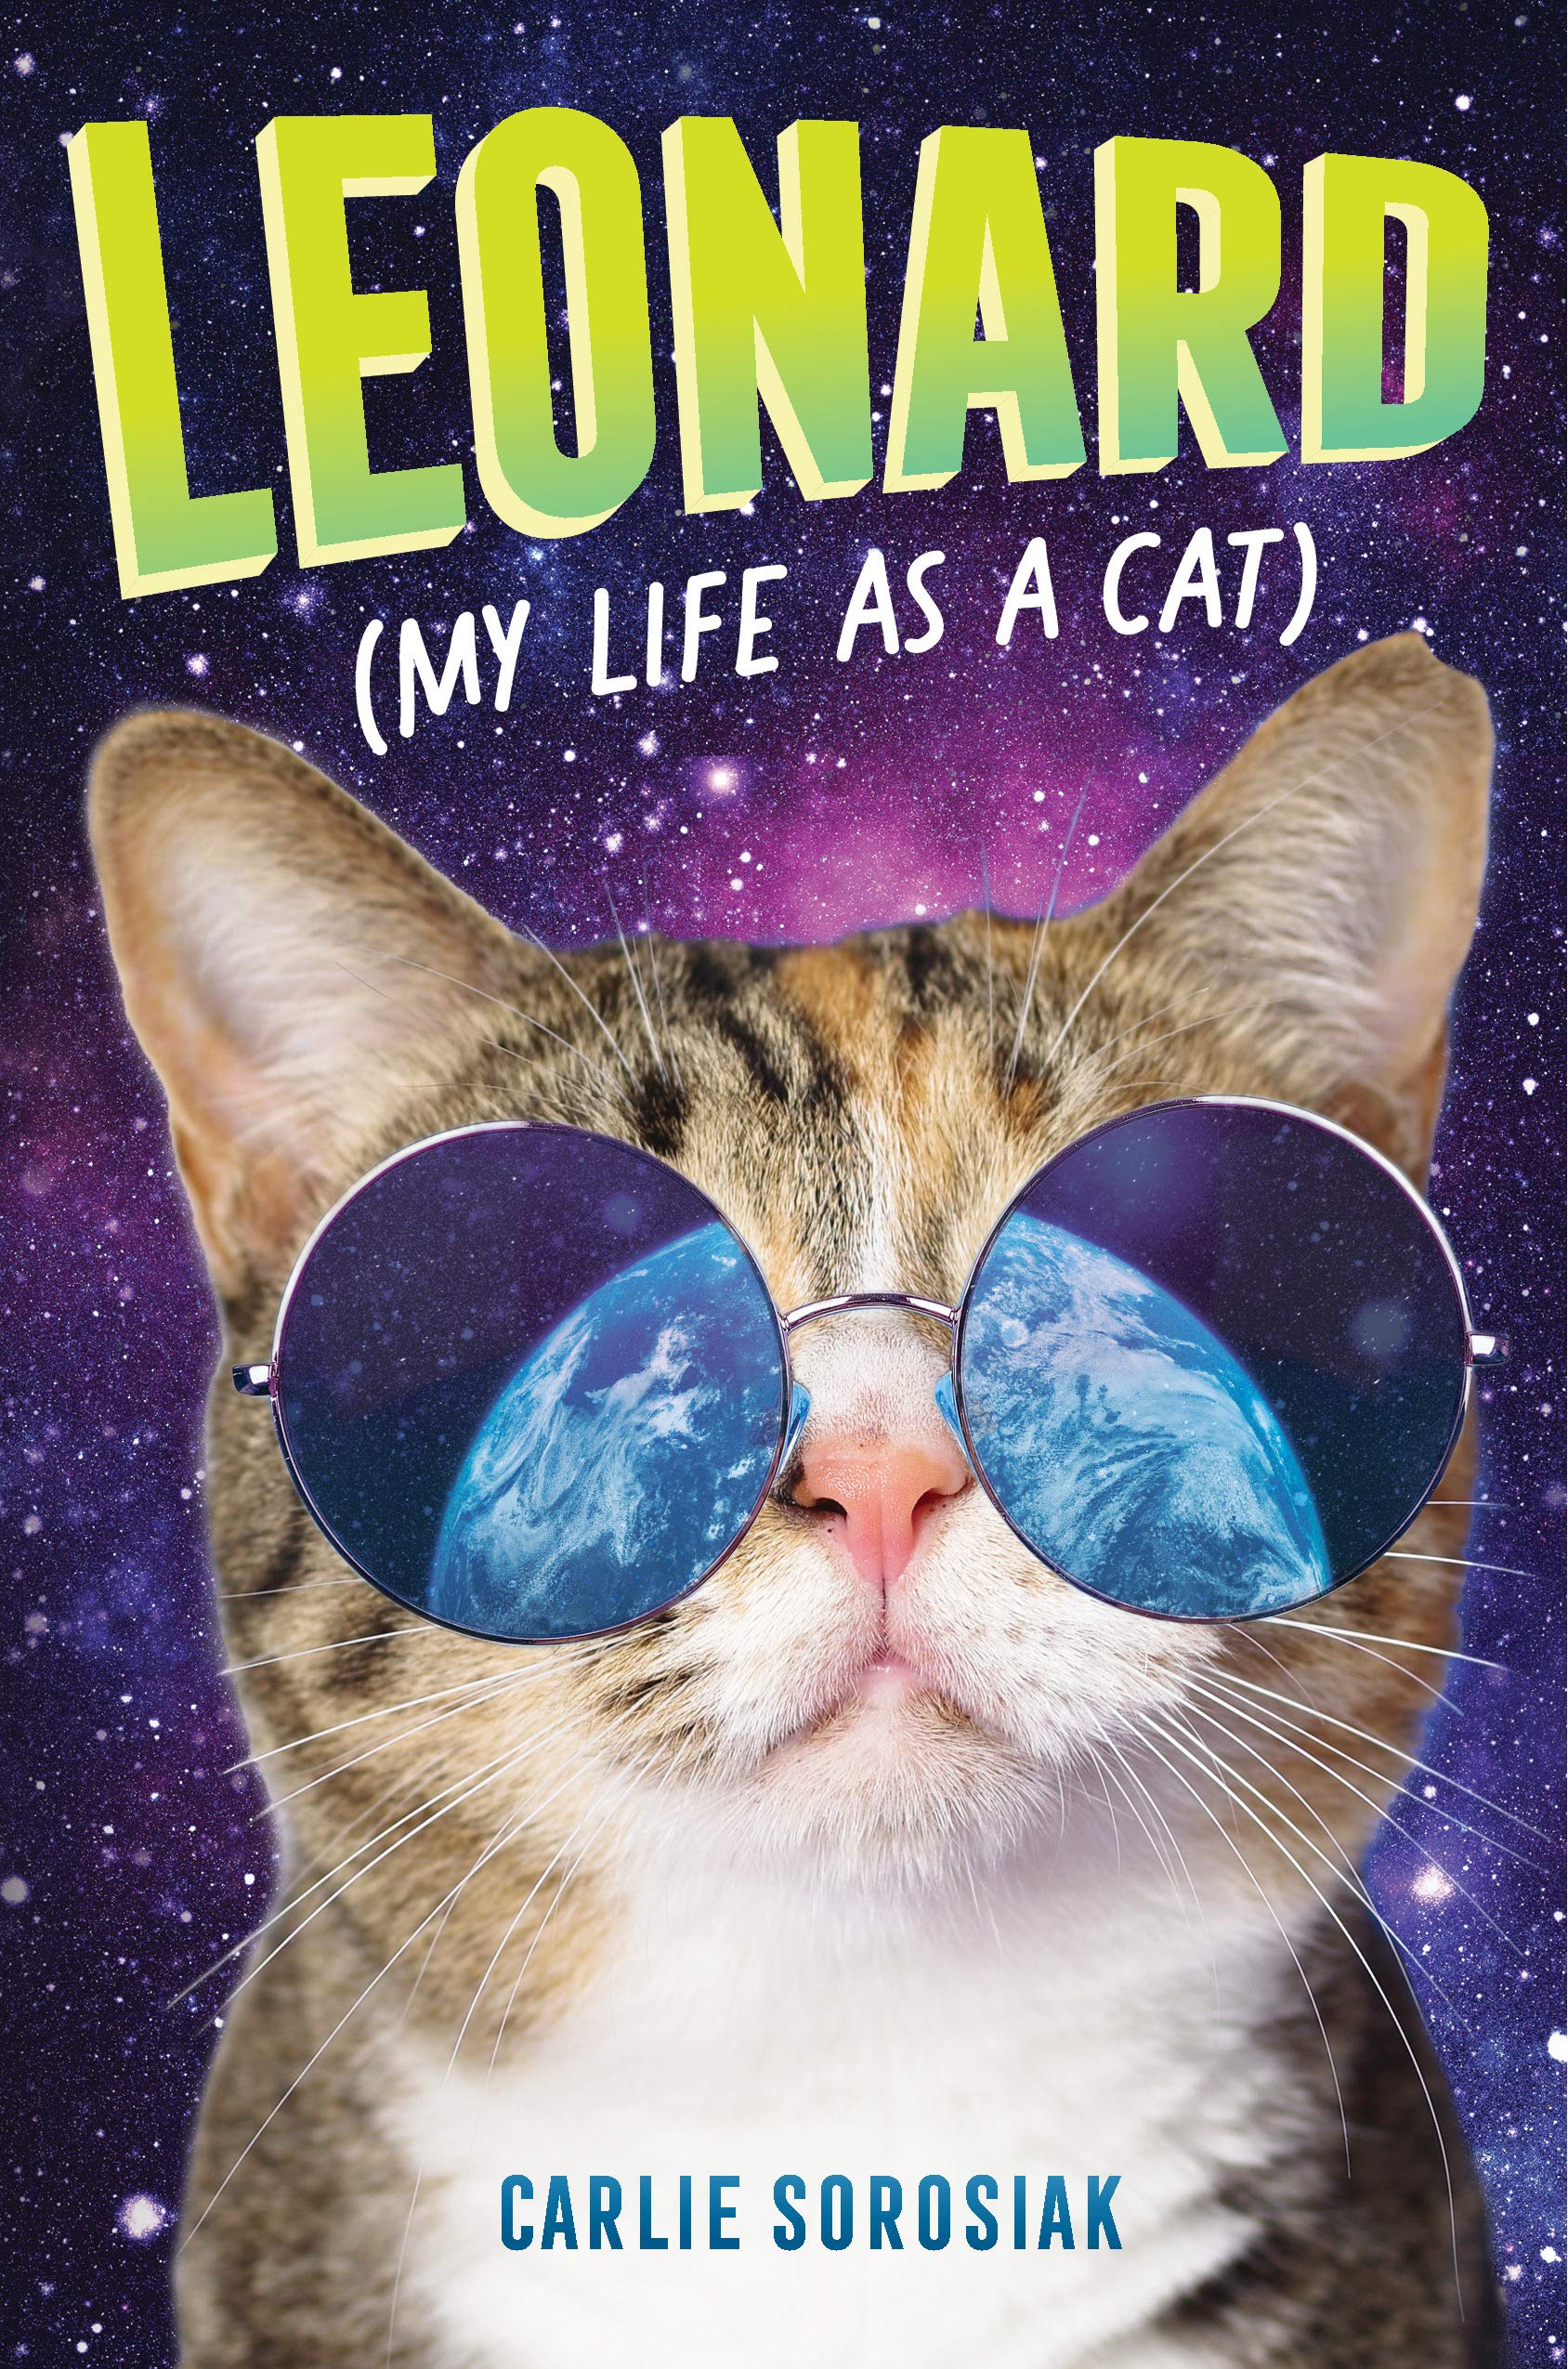 Leonard (my life as a cat) book cover